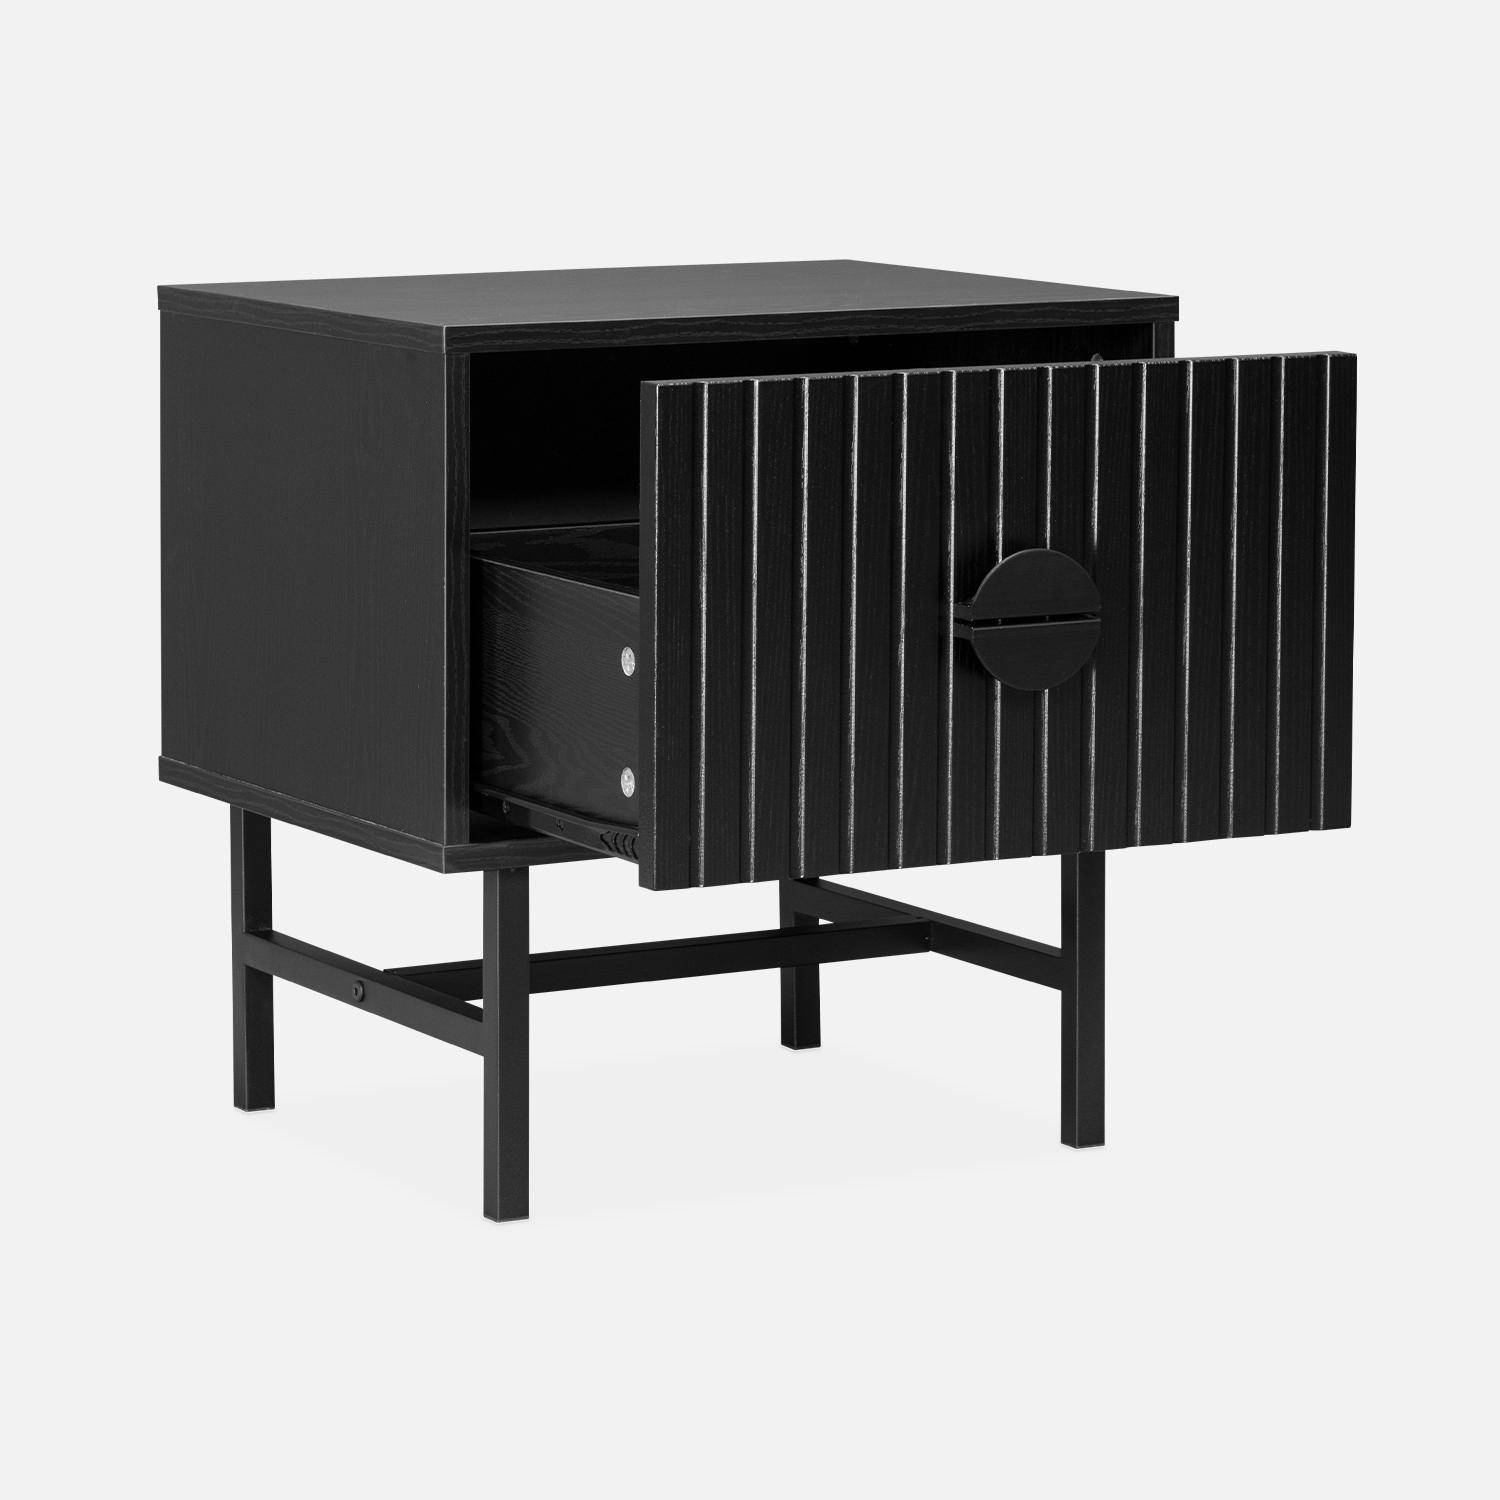 Bedside table with one drawer, ridged effect, industrial style, 48x39x50.3cm - Bazalt - Black Photo6